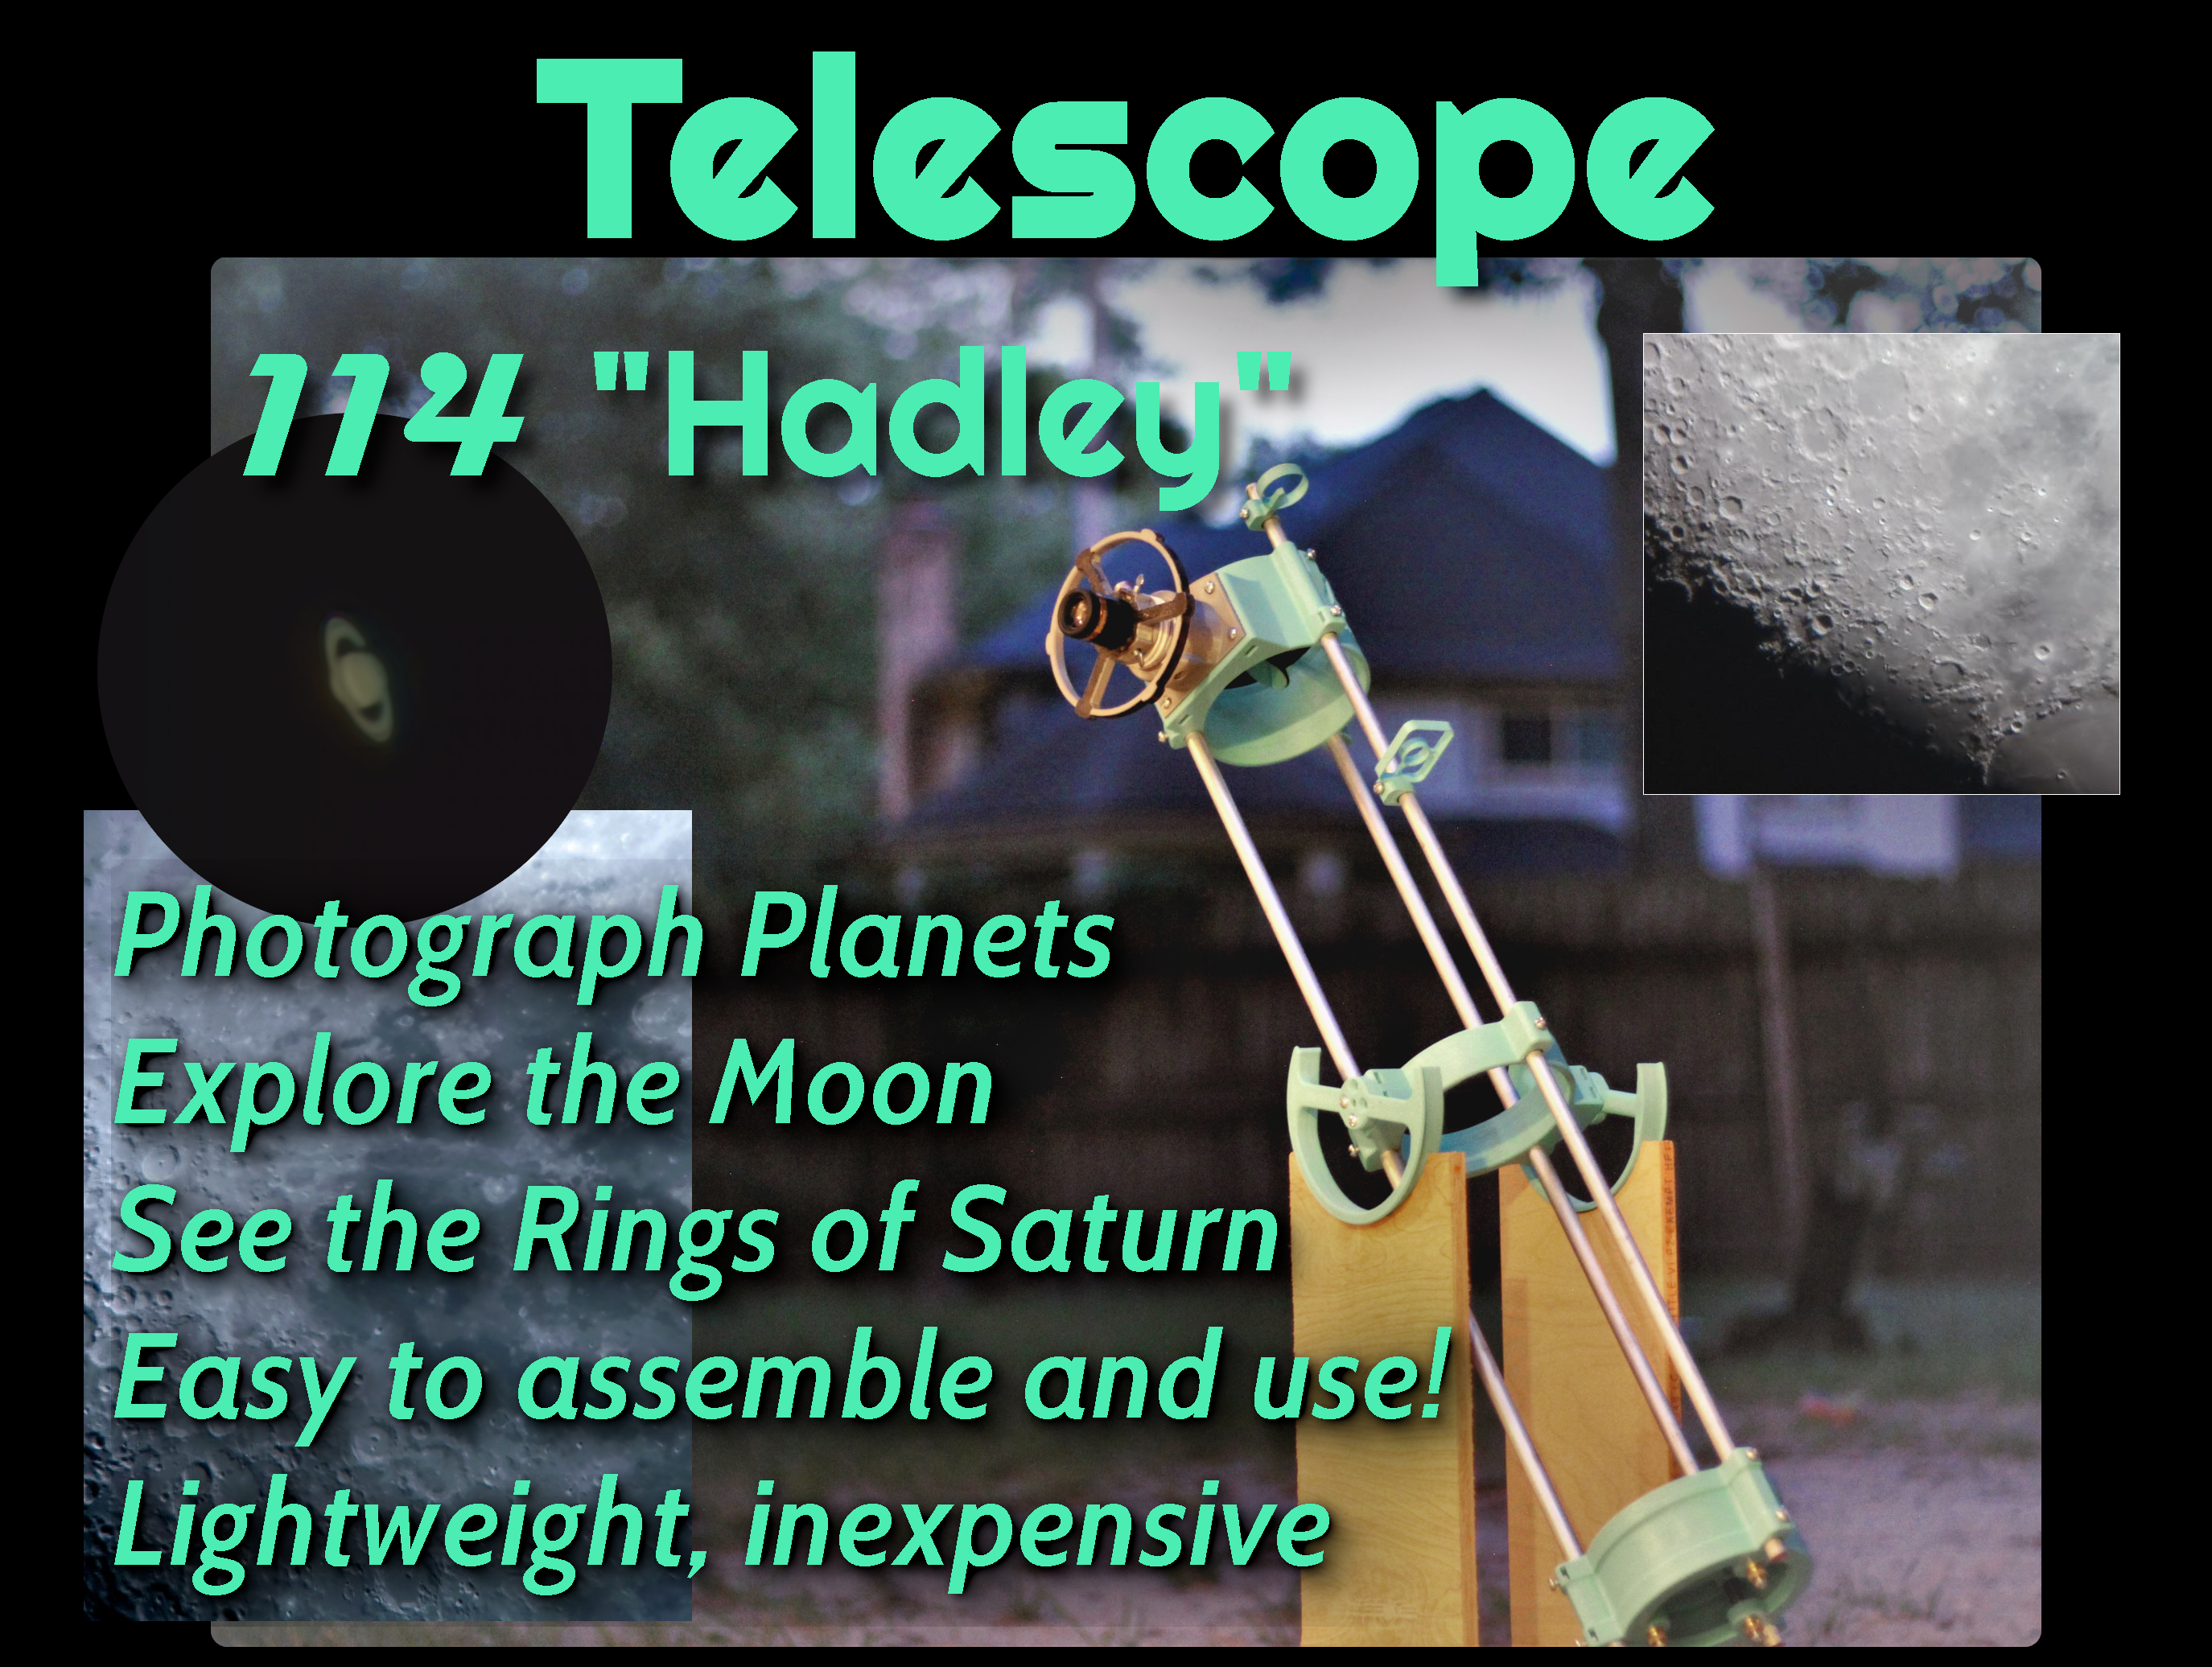 Astronomical Telescope "Hadley" - an easy assembly, high performance Newtonian